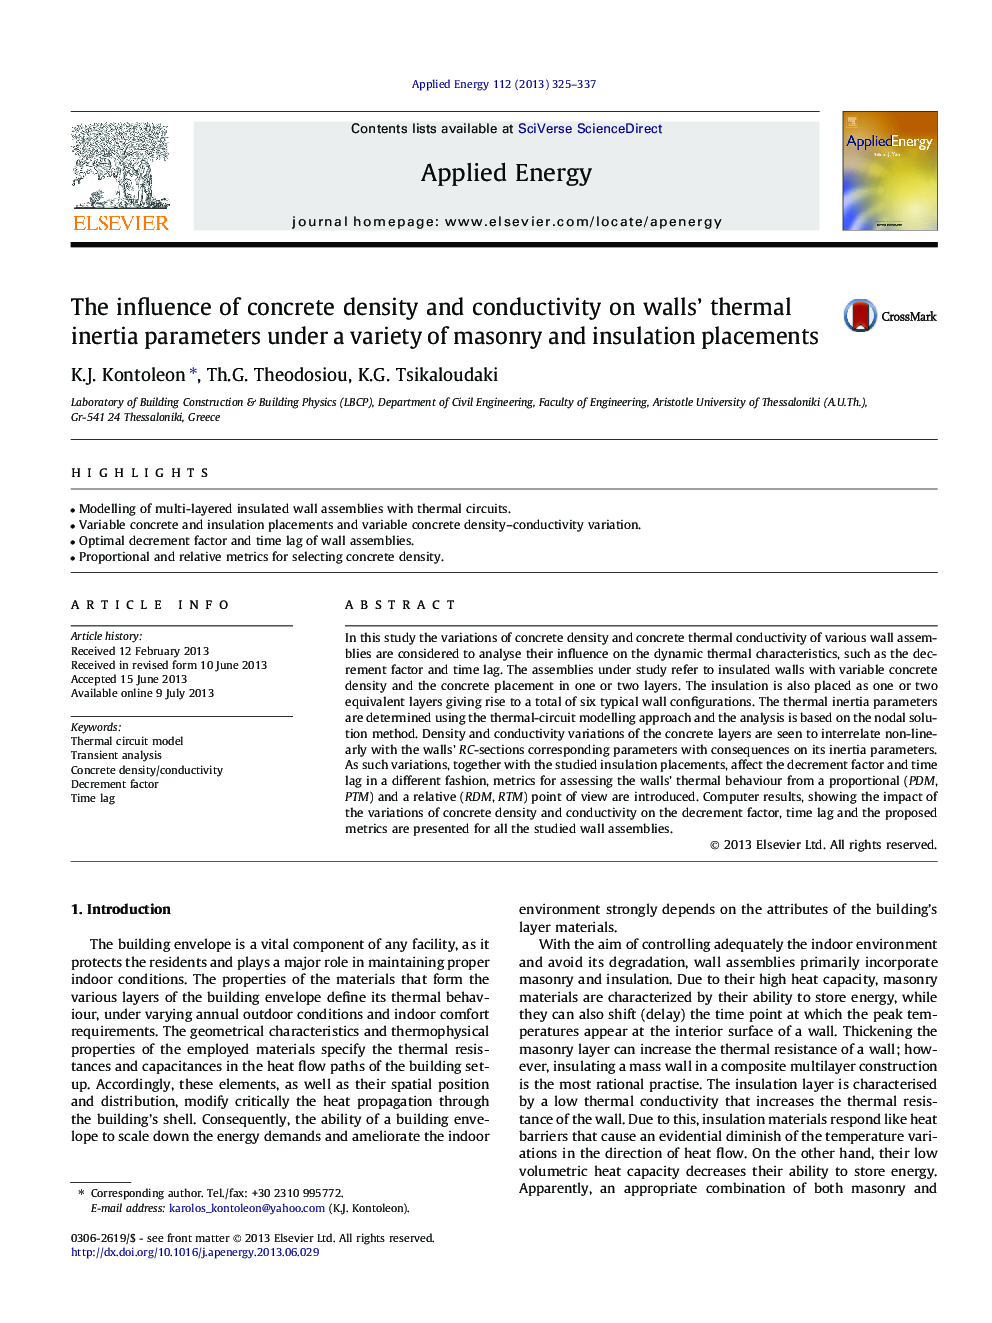 The influence of concrete density and conductivity on walls’ thermal inertia parameters under a variety of masonry and insulation placements